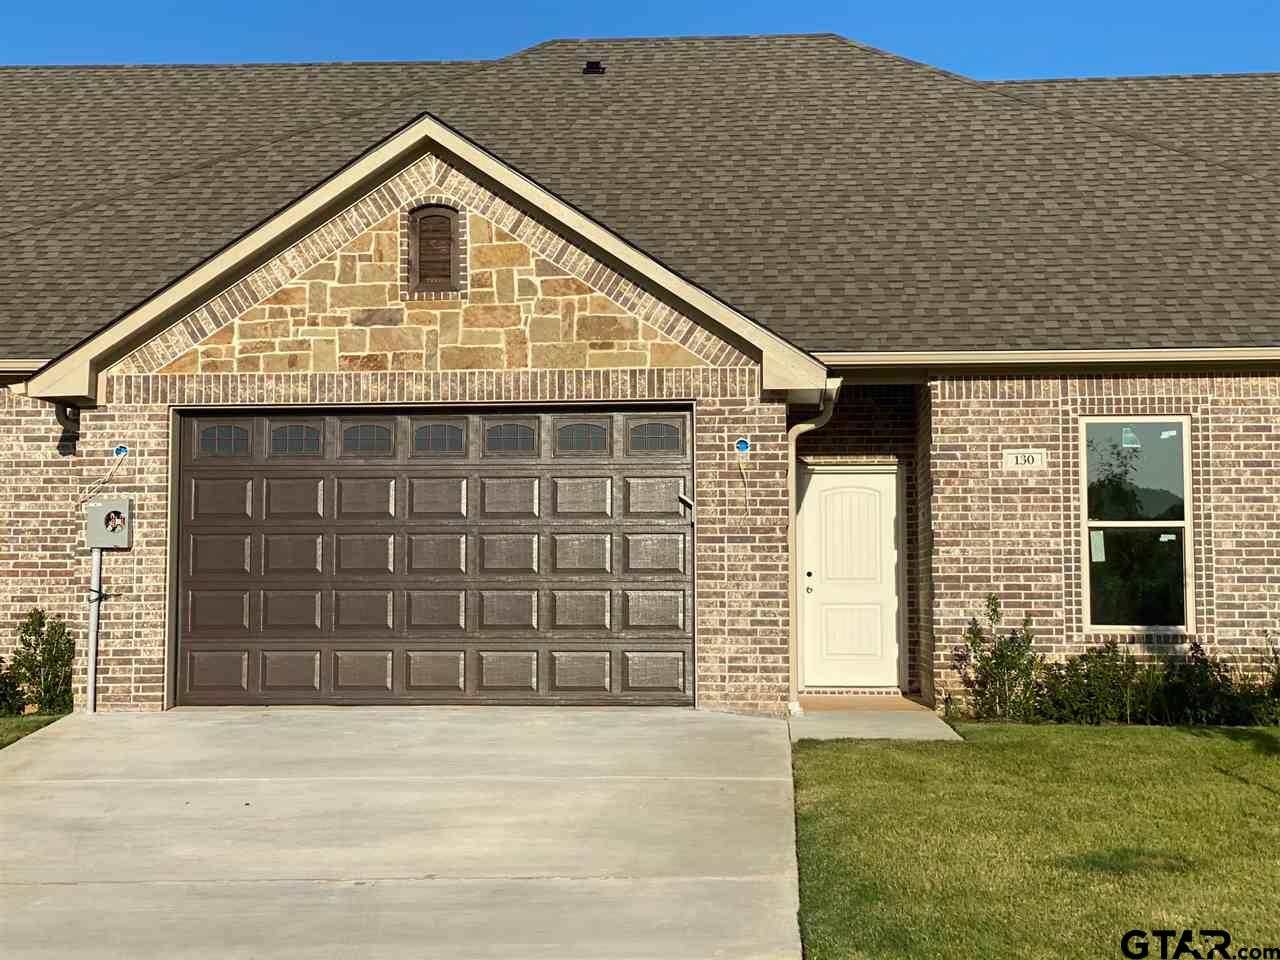 130 Letha Court, Tyler, Texas 75702, 3 Bedrooms Bedrooms, ,2 BathroomsBathrooms,Town Home,For Sale,Letha Court,24005281